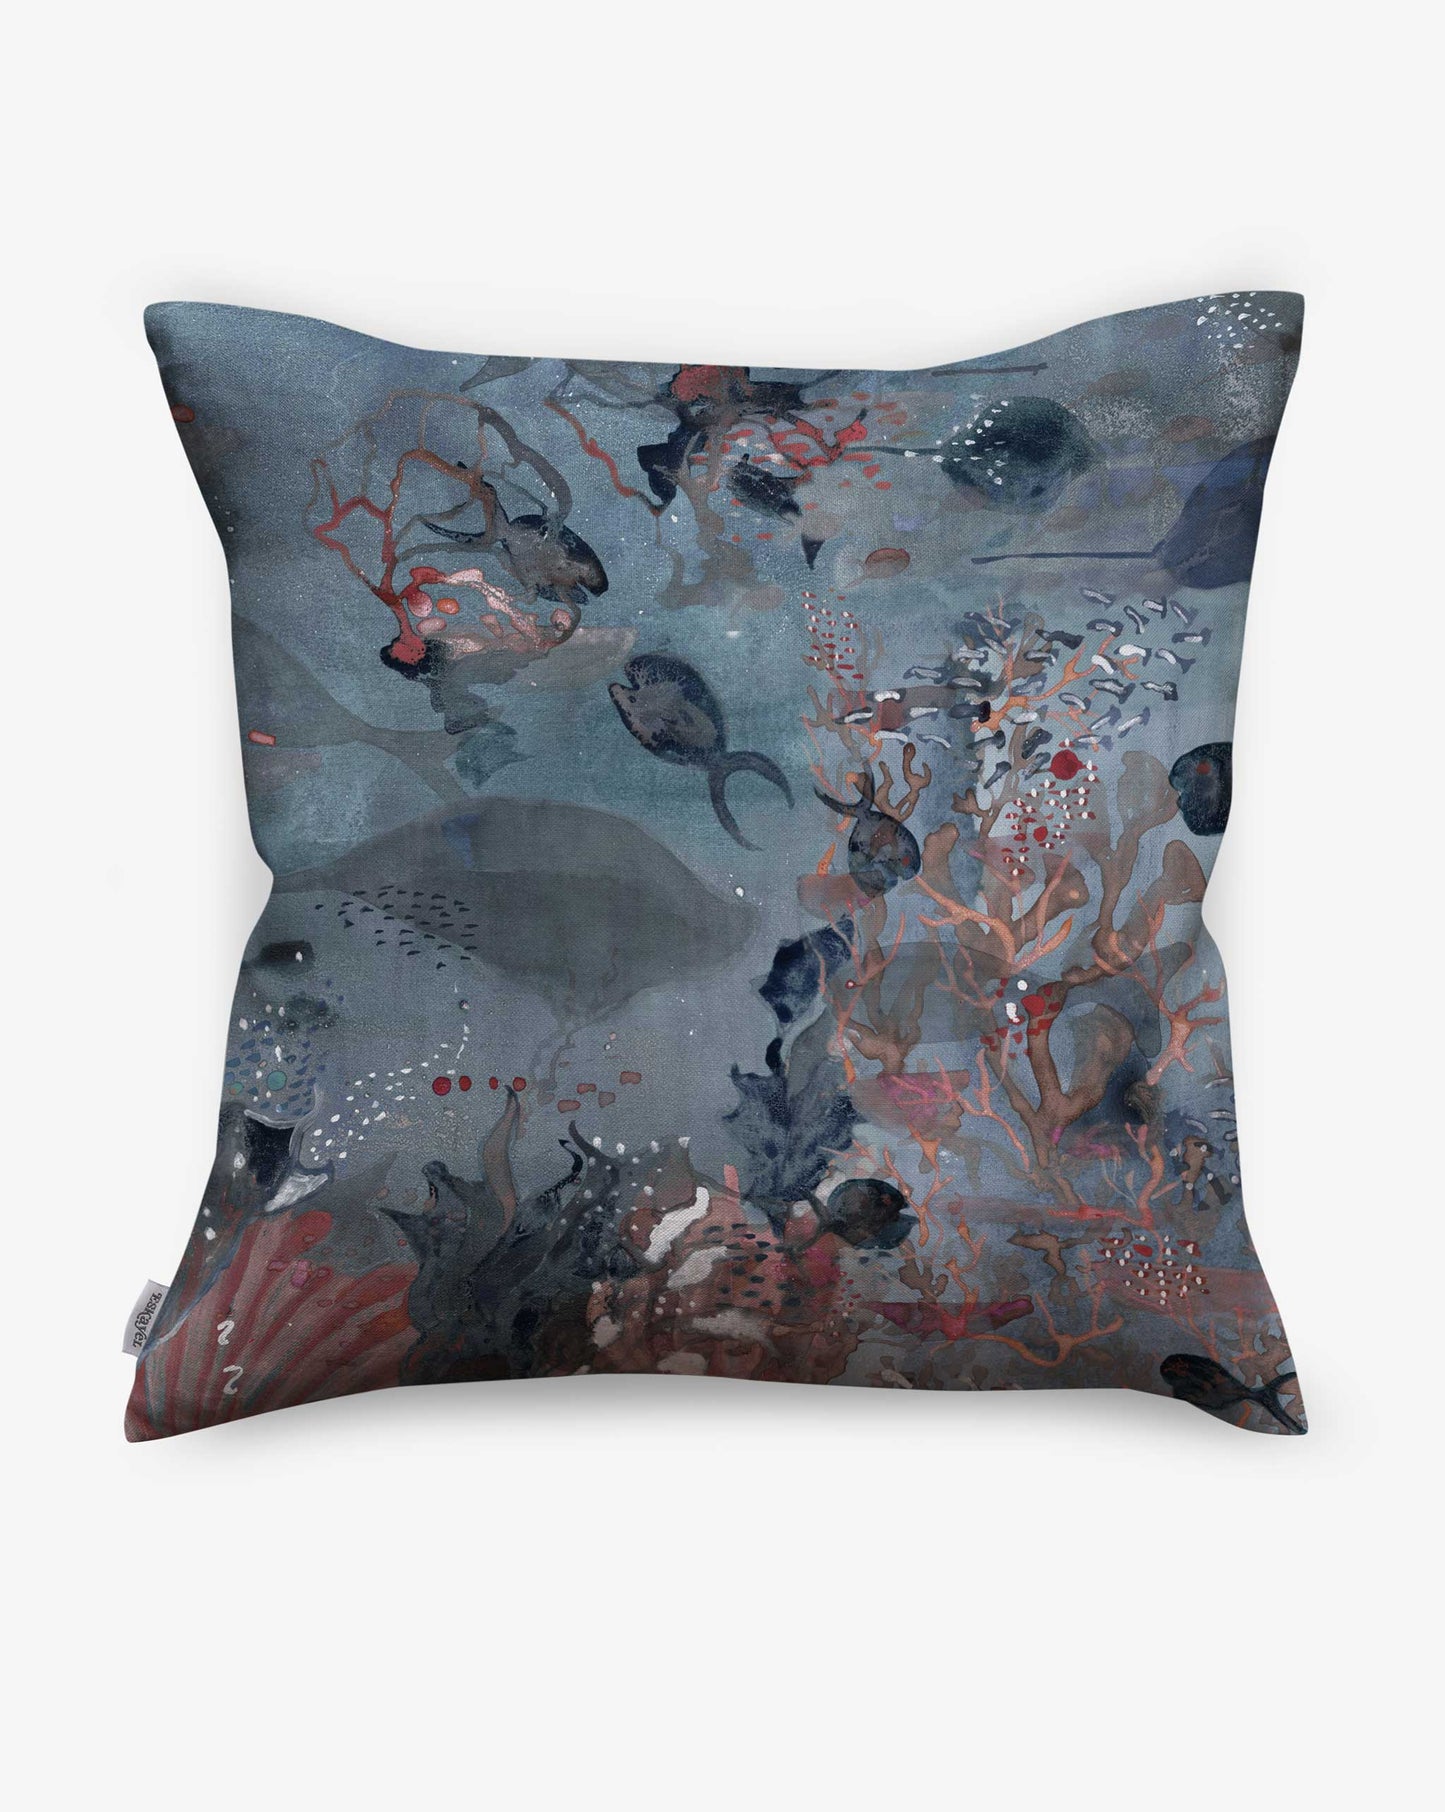 Atoll linen pillows in Ocean combine blue hues in a watery, atmospheric design.